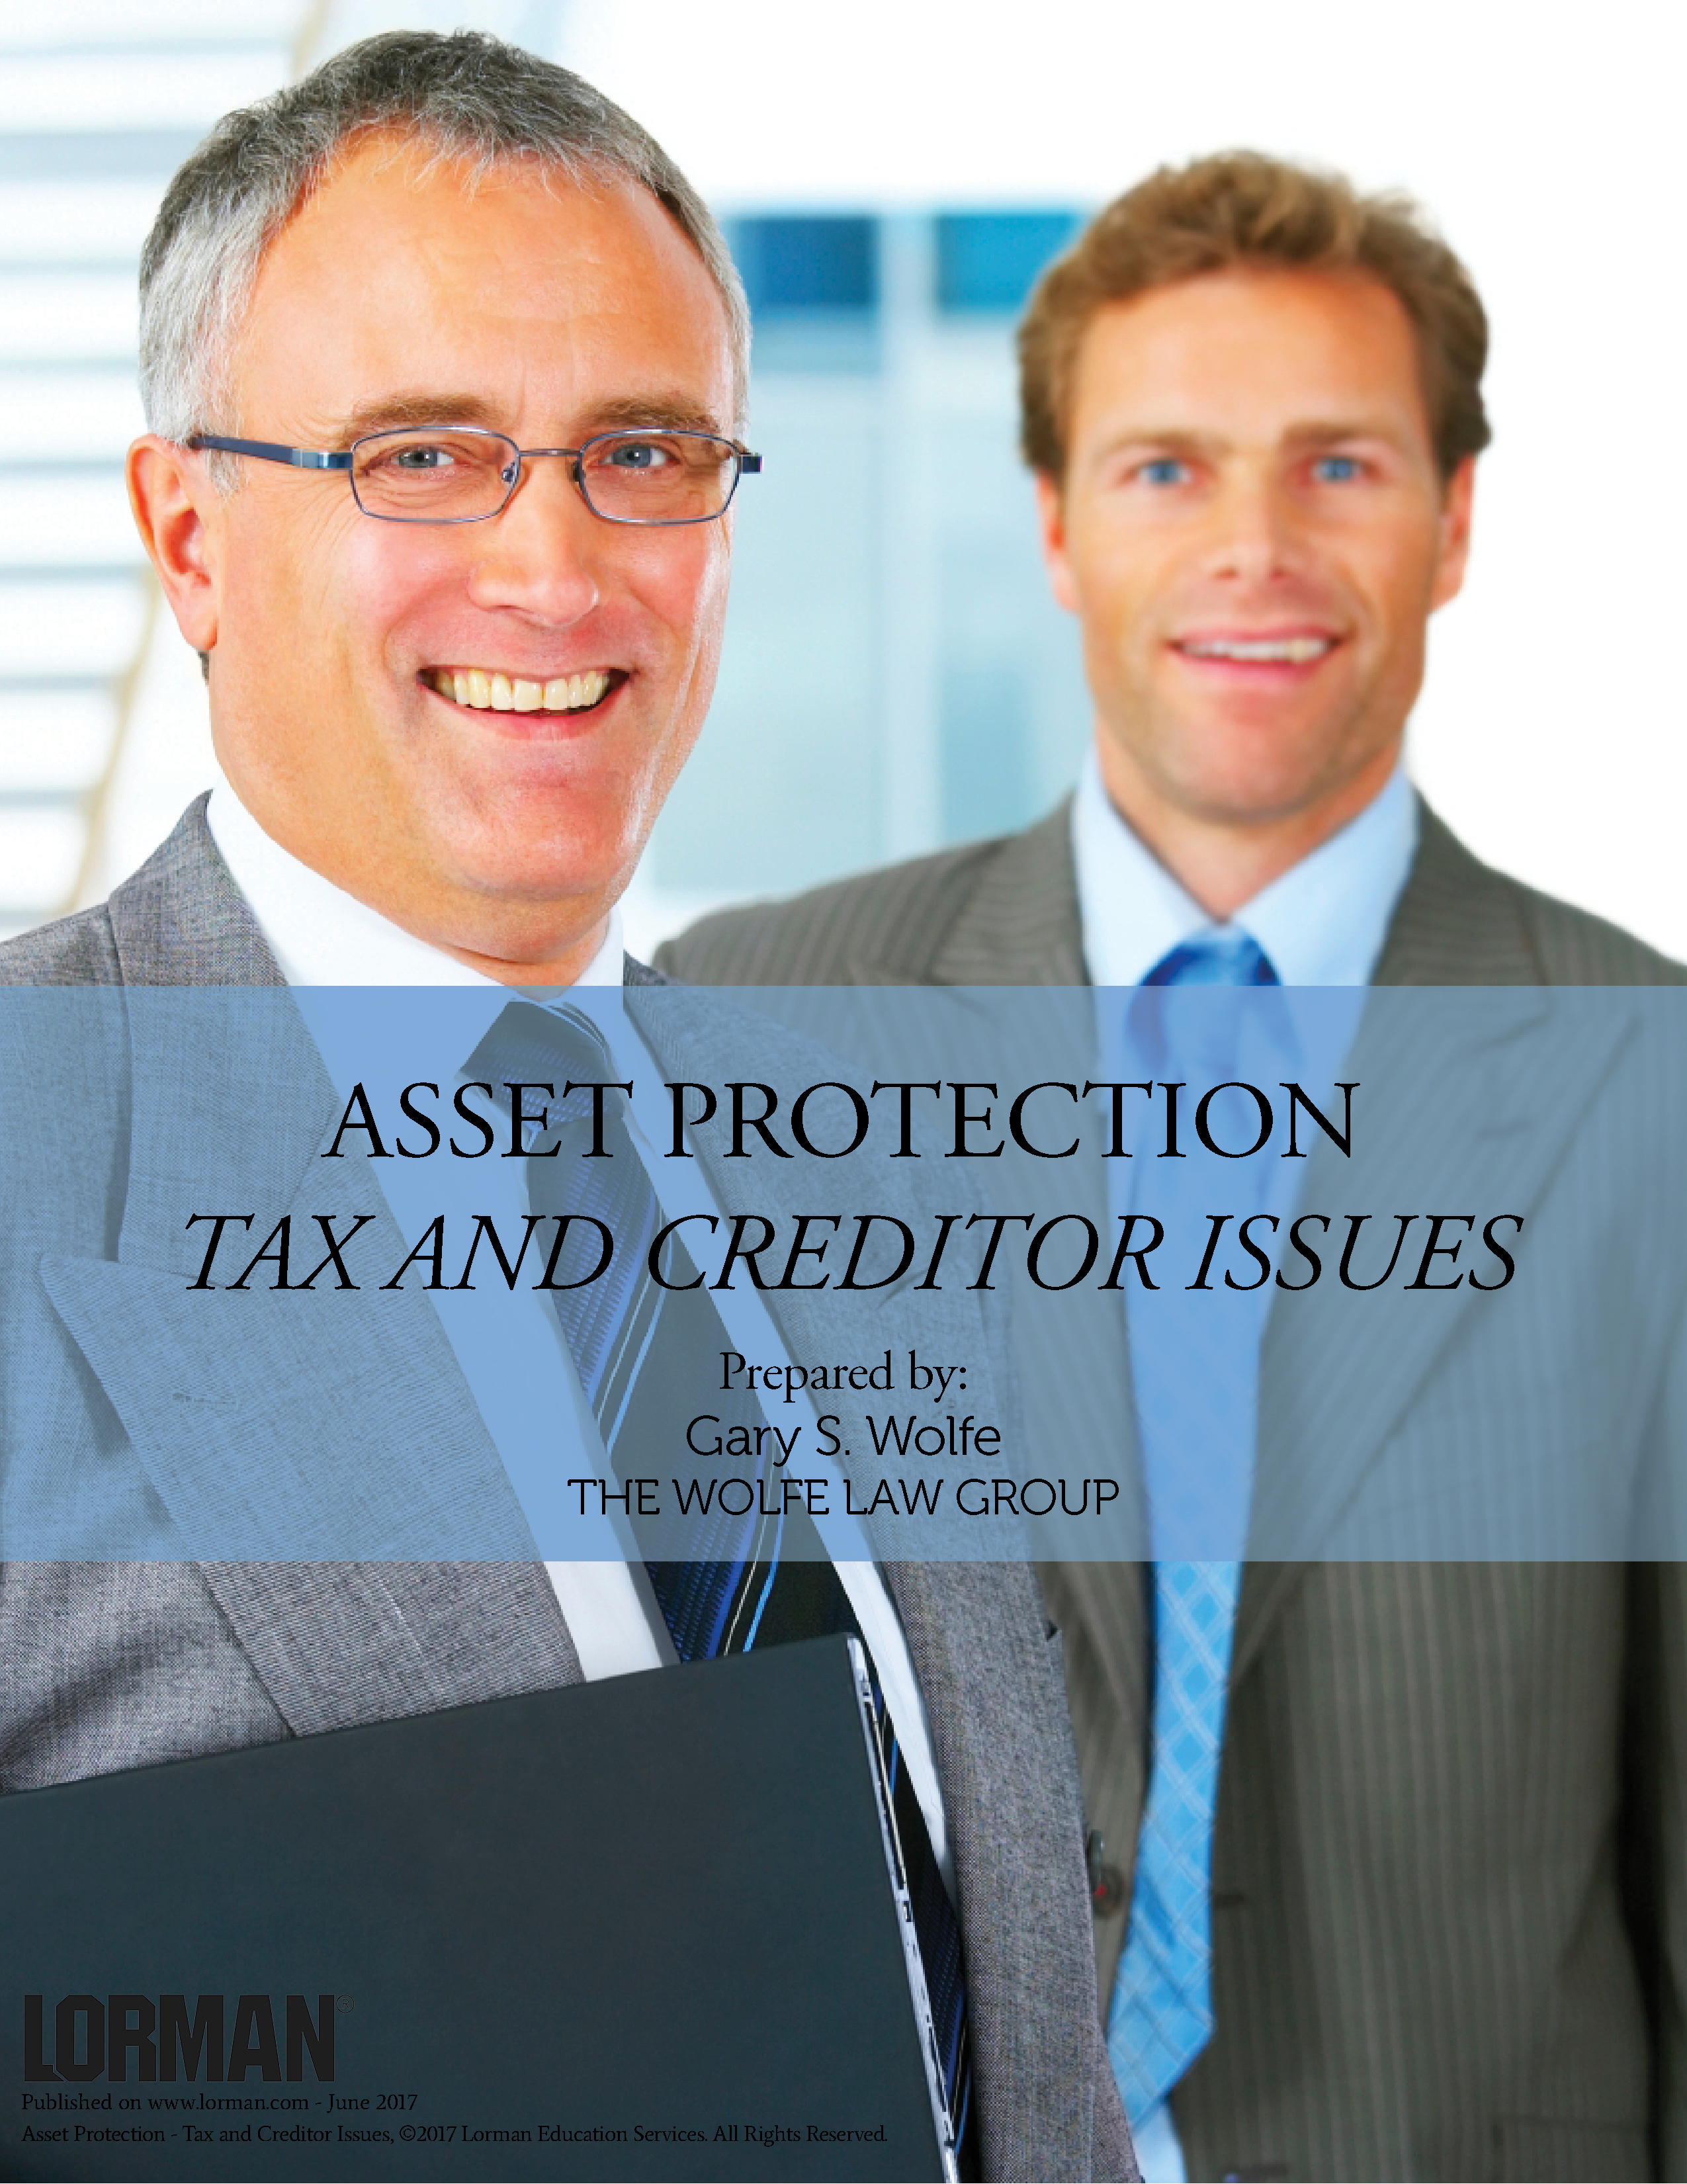 Asset Protection - Tax and Creditor Issues